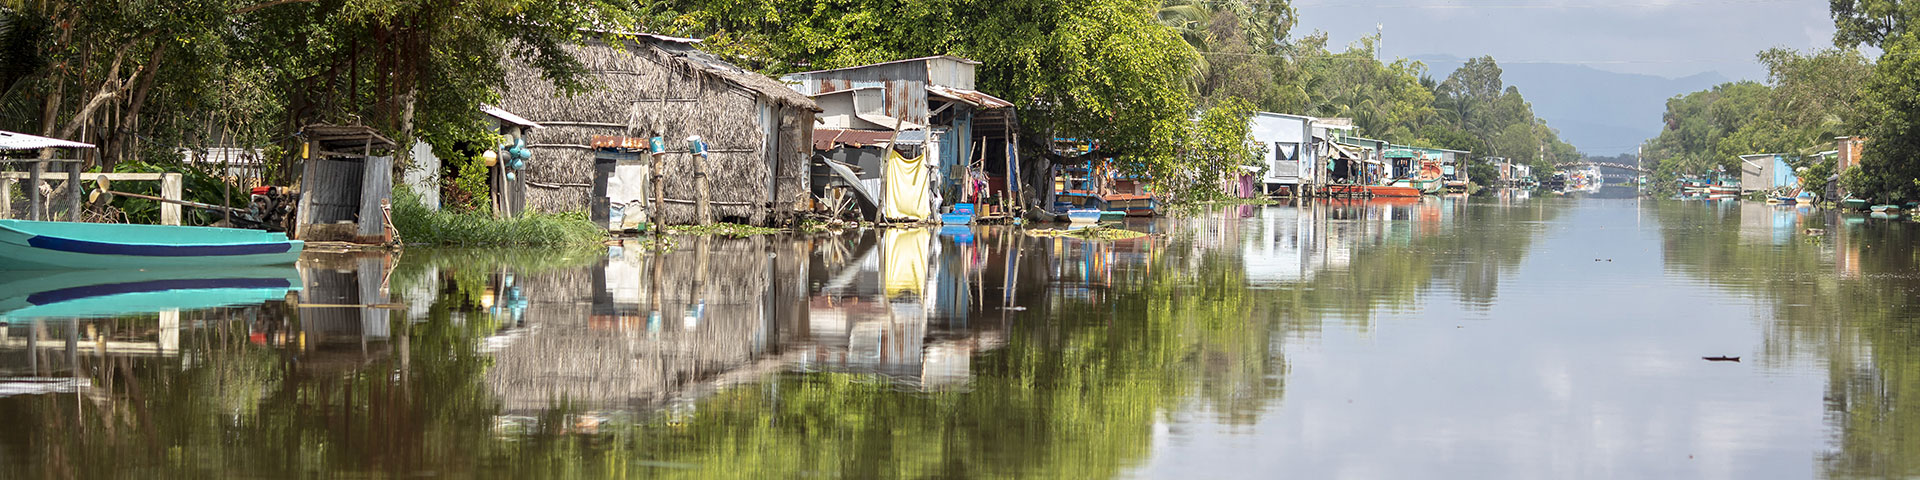 A river with huts, boats and trees lining its banks.